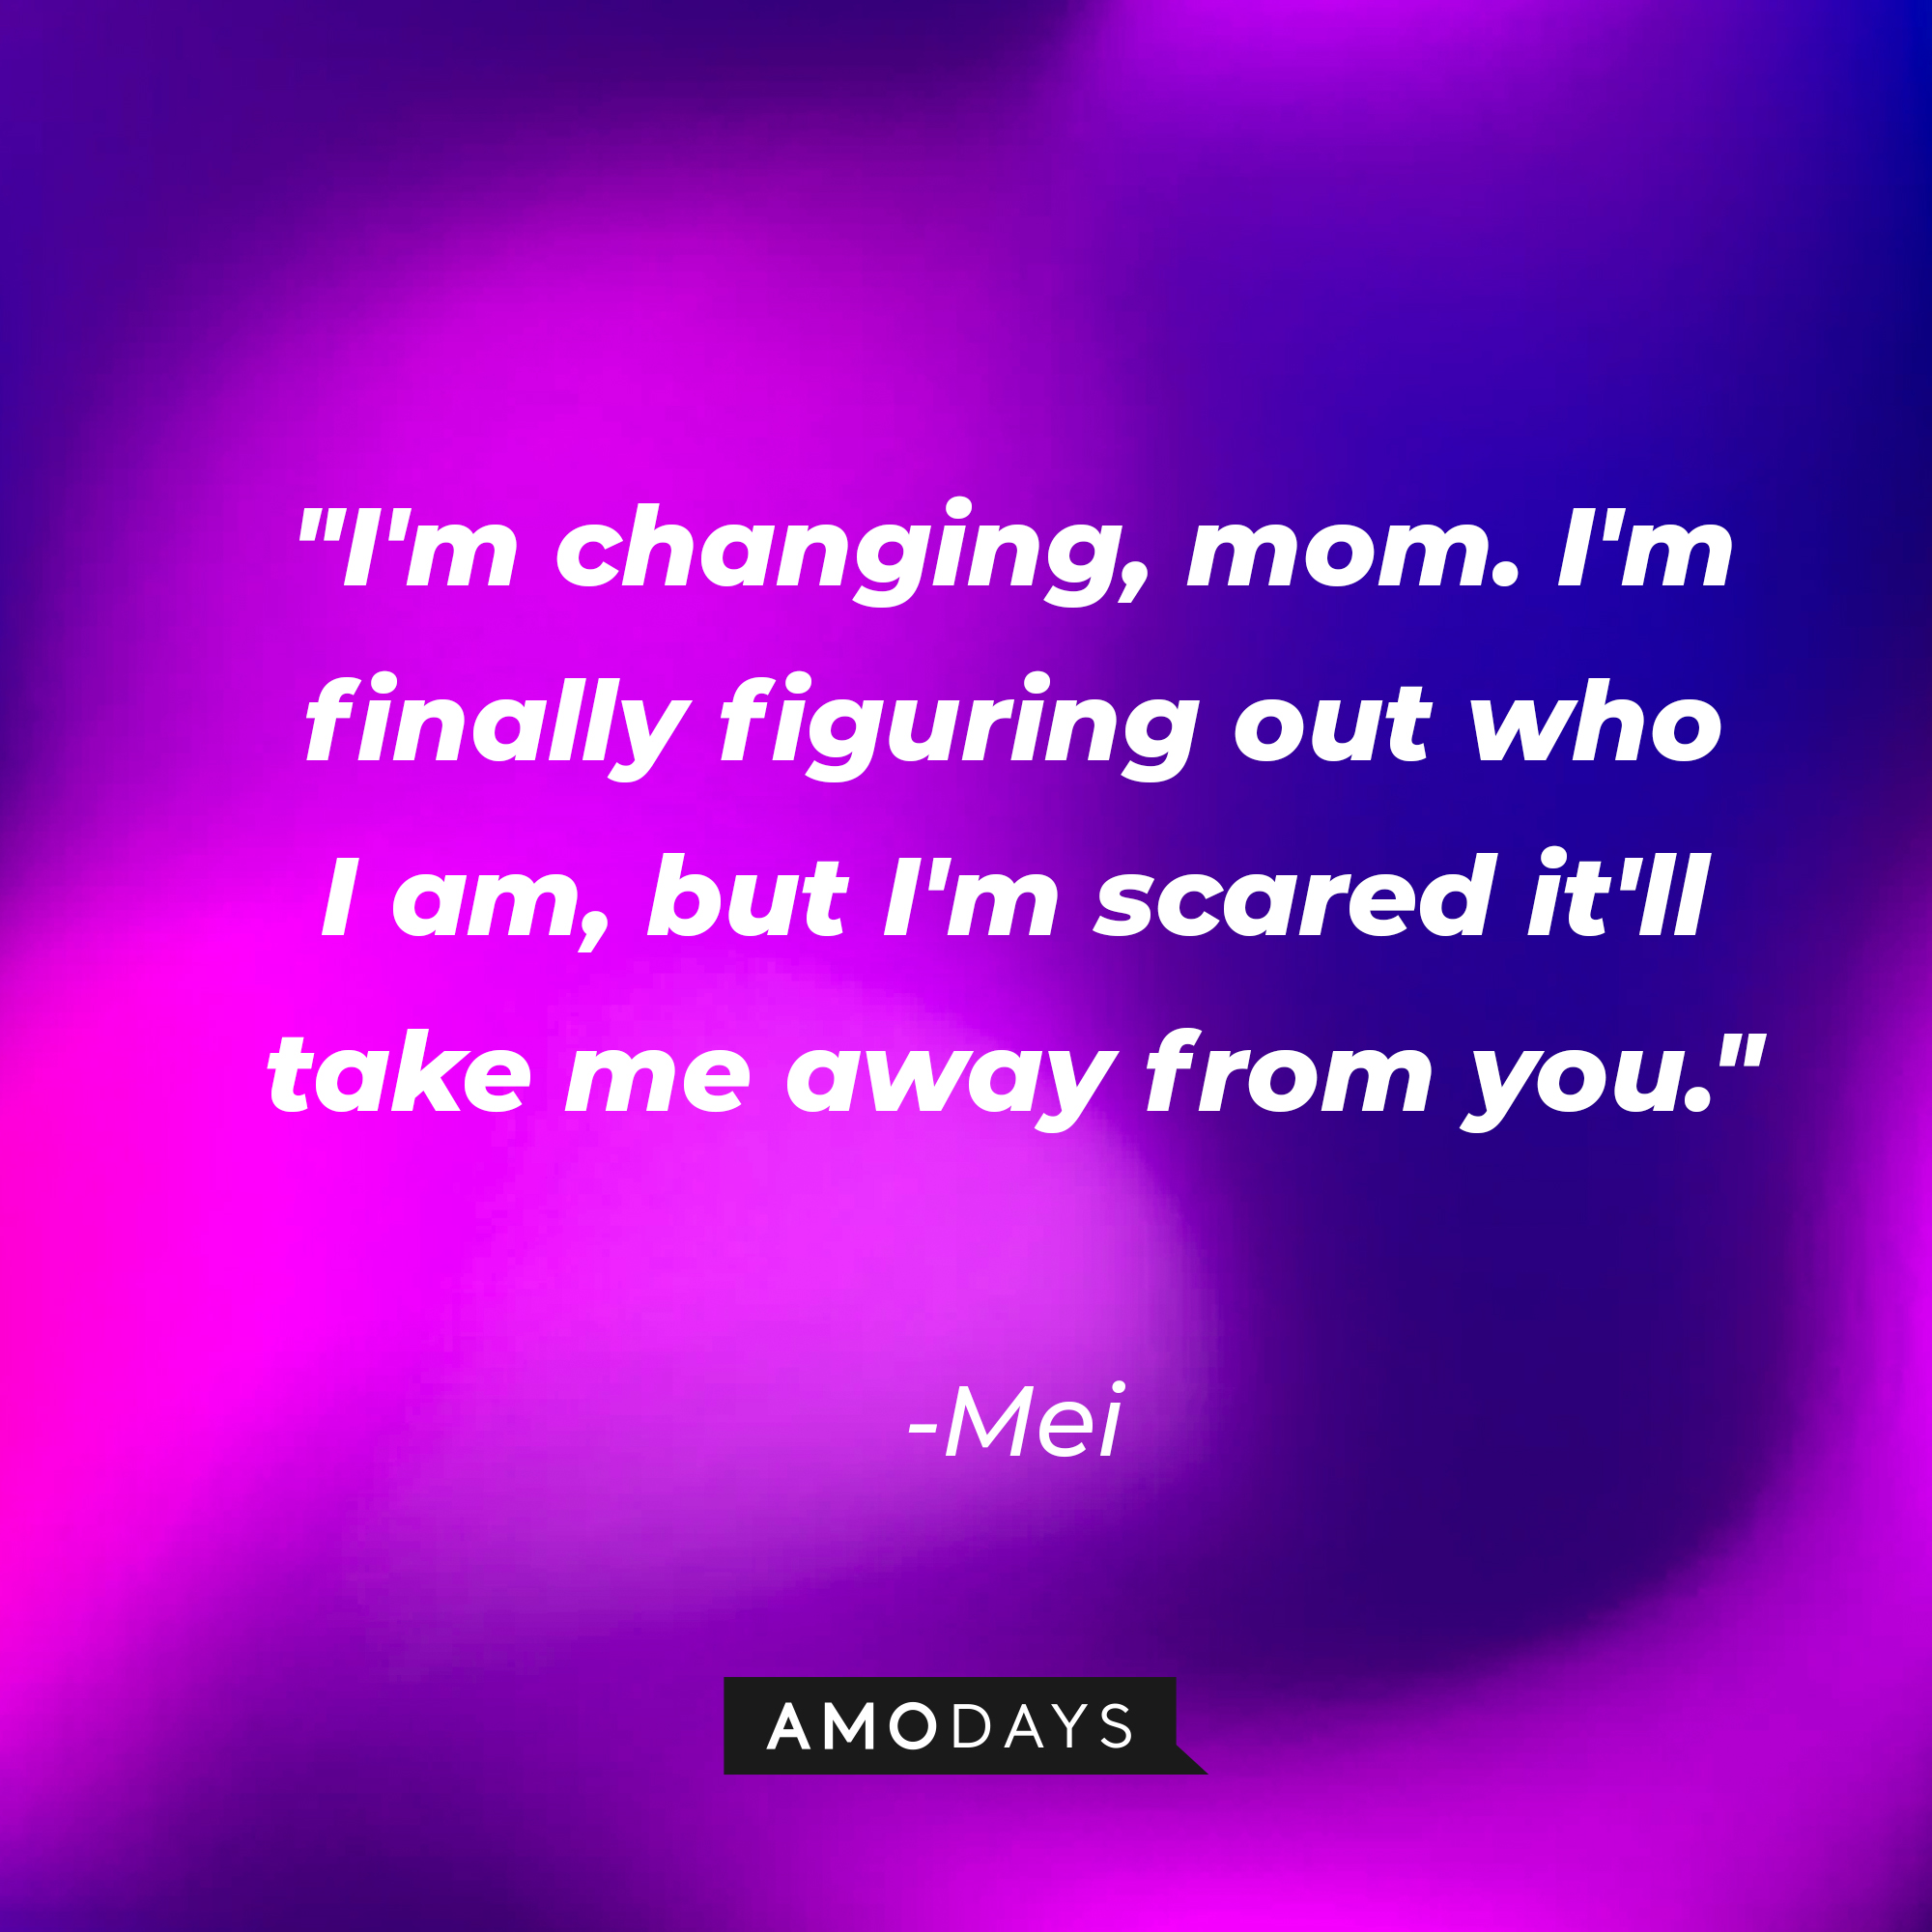 Mei's quote: "I'm changing, mom. I'm finally figuring out who I am, but I'm scared it'll take me away from you." | Source: AmoDays